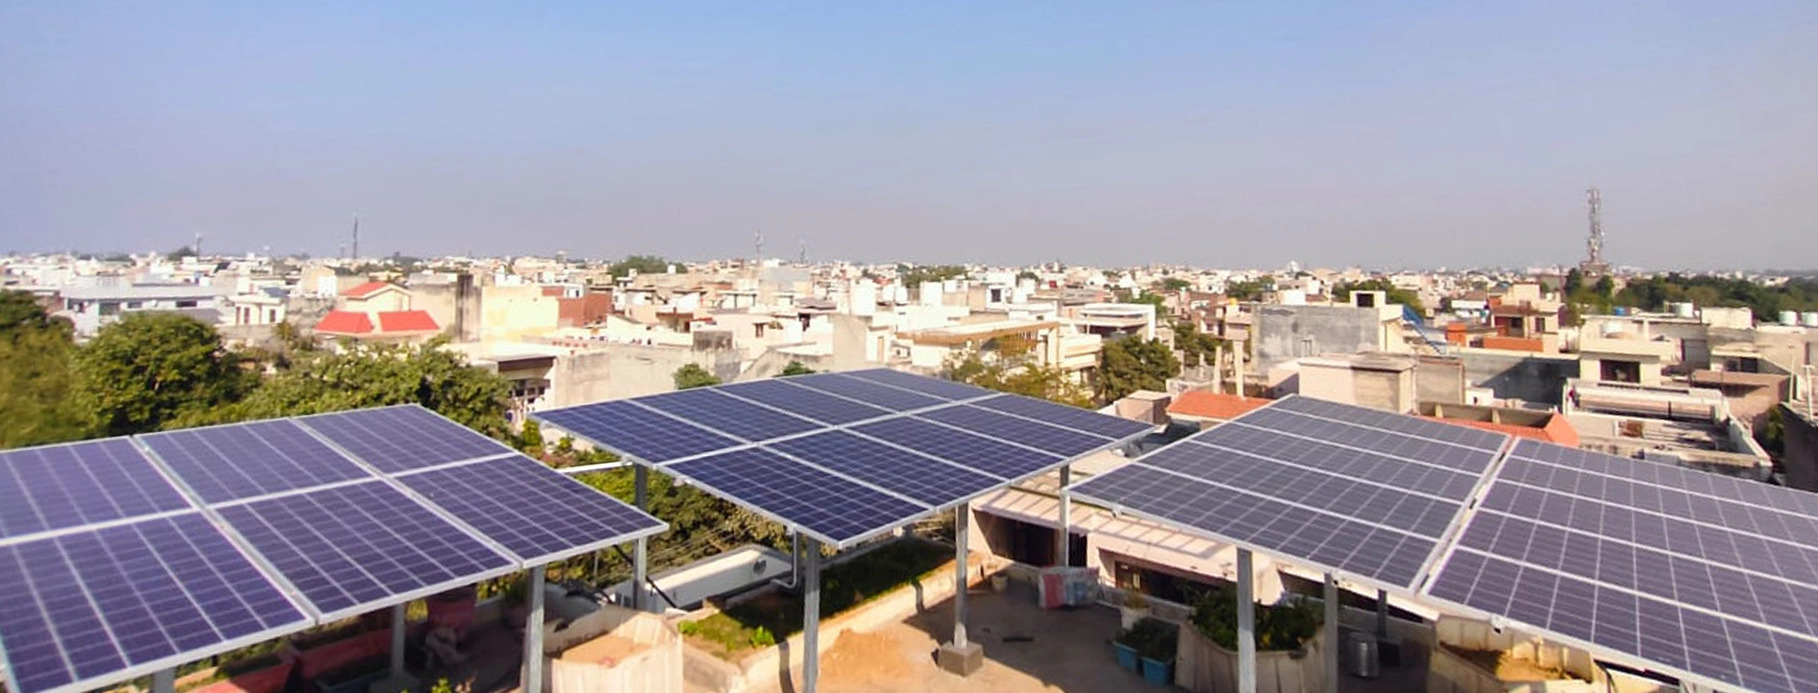 Rooftop Solar for Home